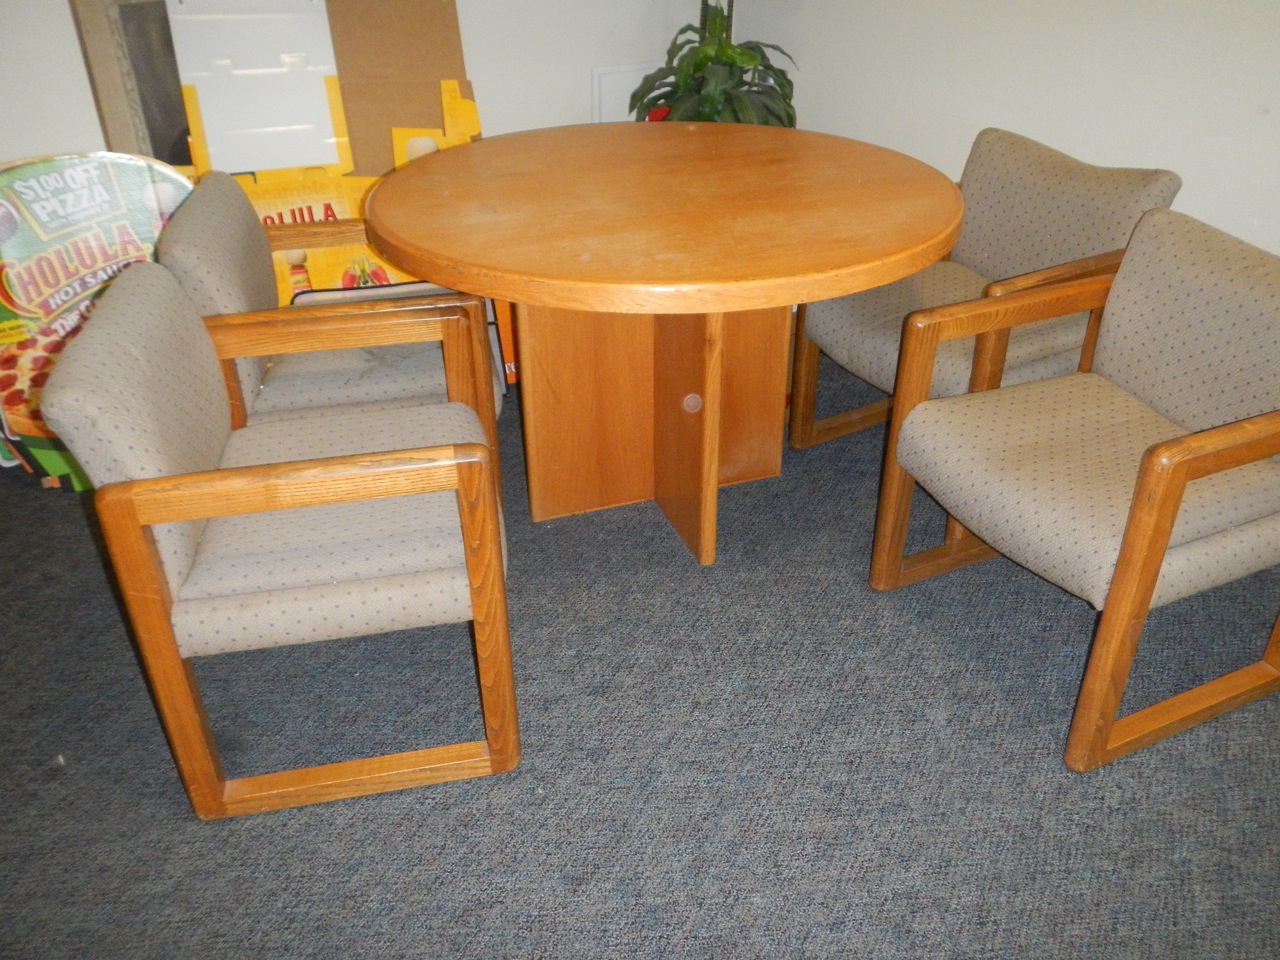 Office Moving Furniture For Sale In Santa Ana Ca Classified